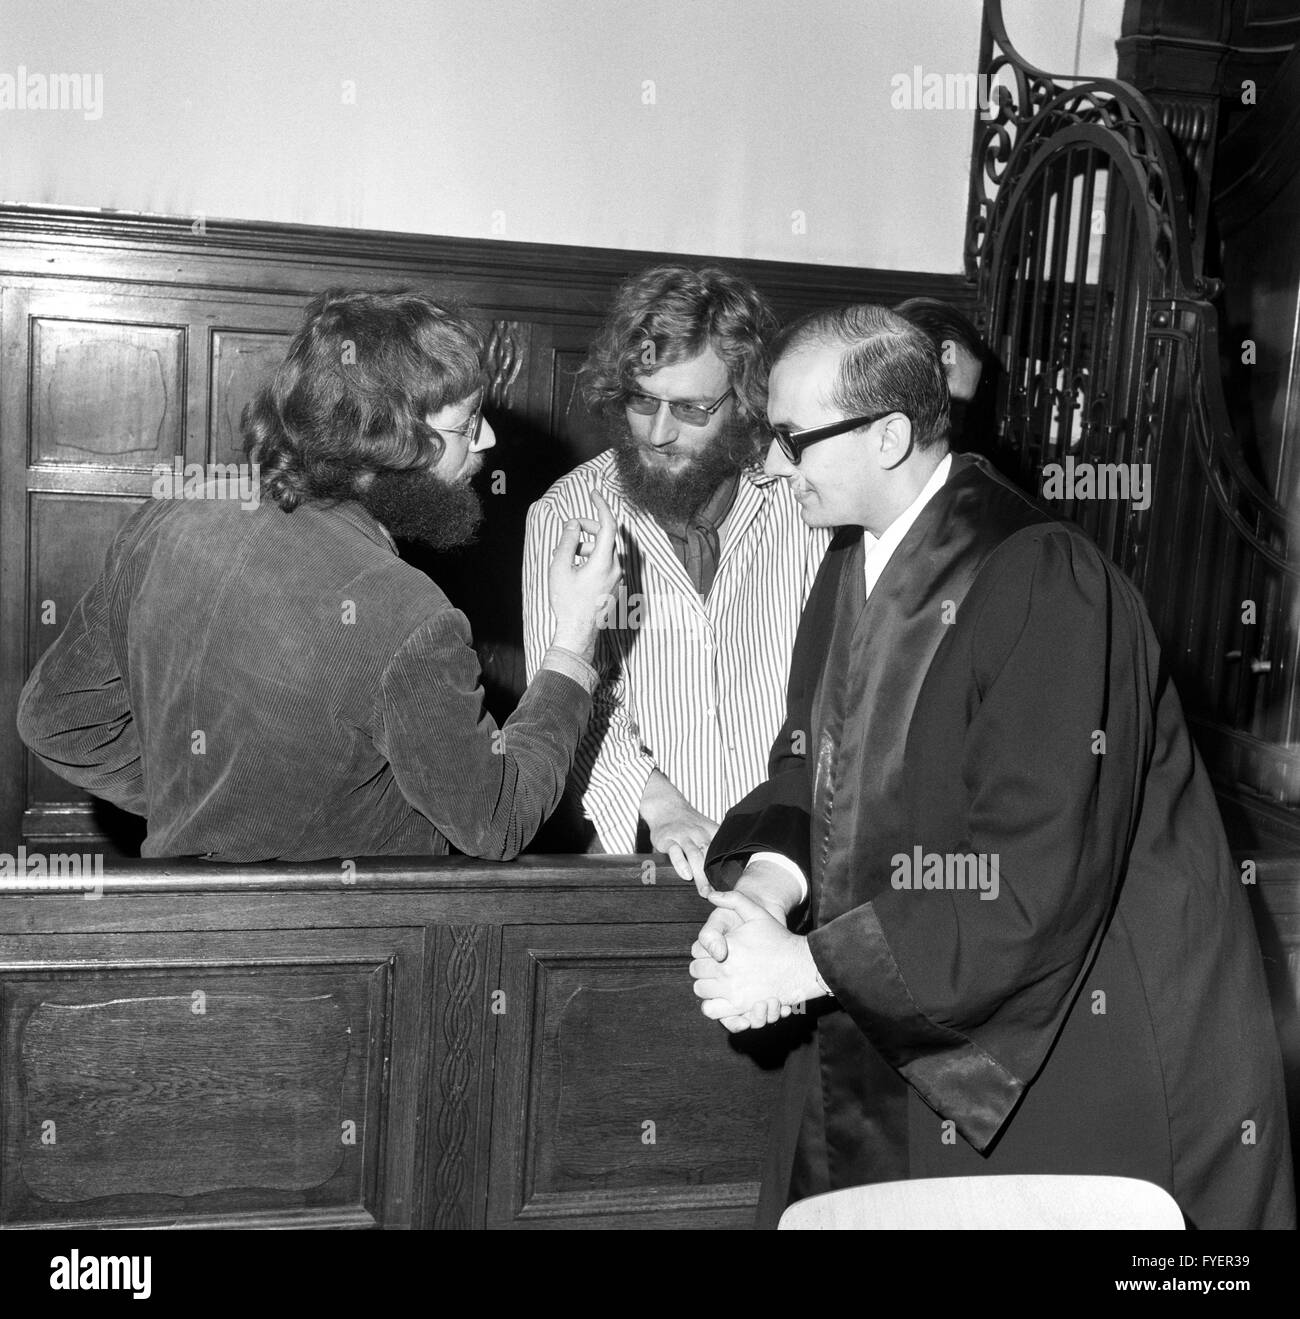 The defendants Fritz Teufel and Jörg Schlotter (l-r) and lawyer Horst Mahler. The process because of trespass against Teufel and Schlotterer, who had not appeared to an earlier date and and therefore had been arrested, started on 03 October 1968 in Berlin. Teufel stated - ironically - that he regretted his transgressions deeply and wanted to be punished with three to five years of prison. His fellow defendent Schlotterer was a 'disgusting anarchist' and his lawyer Mahler should be put into prison. Stock Photo